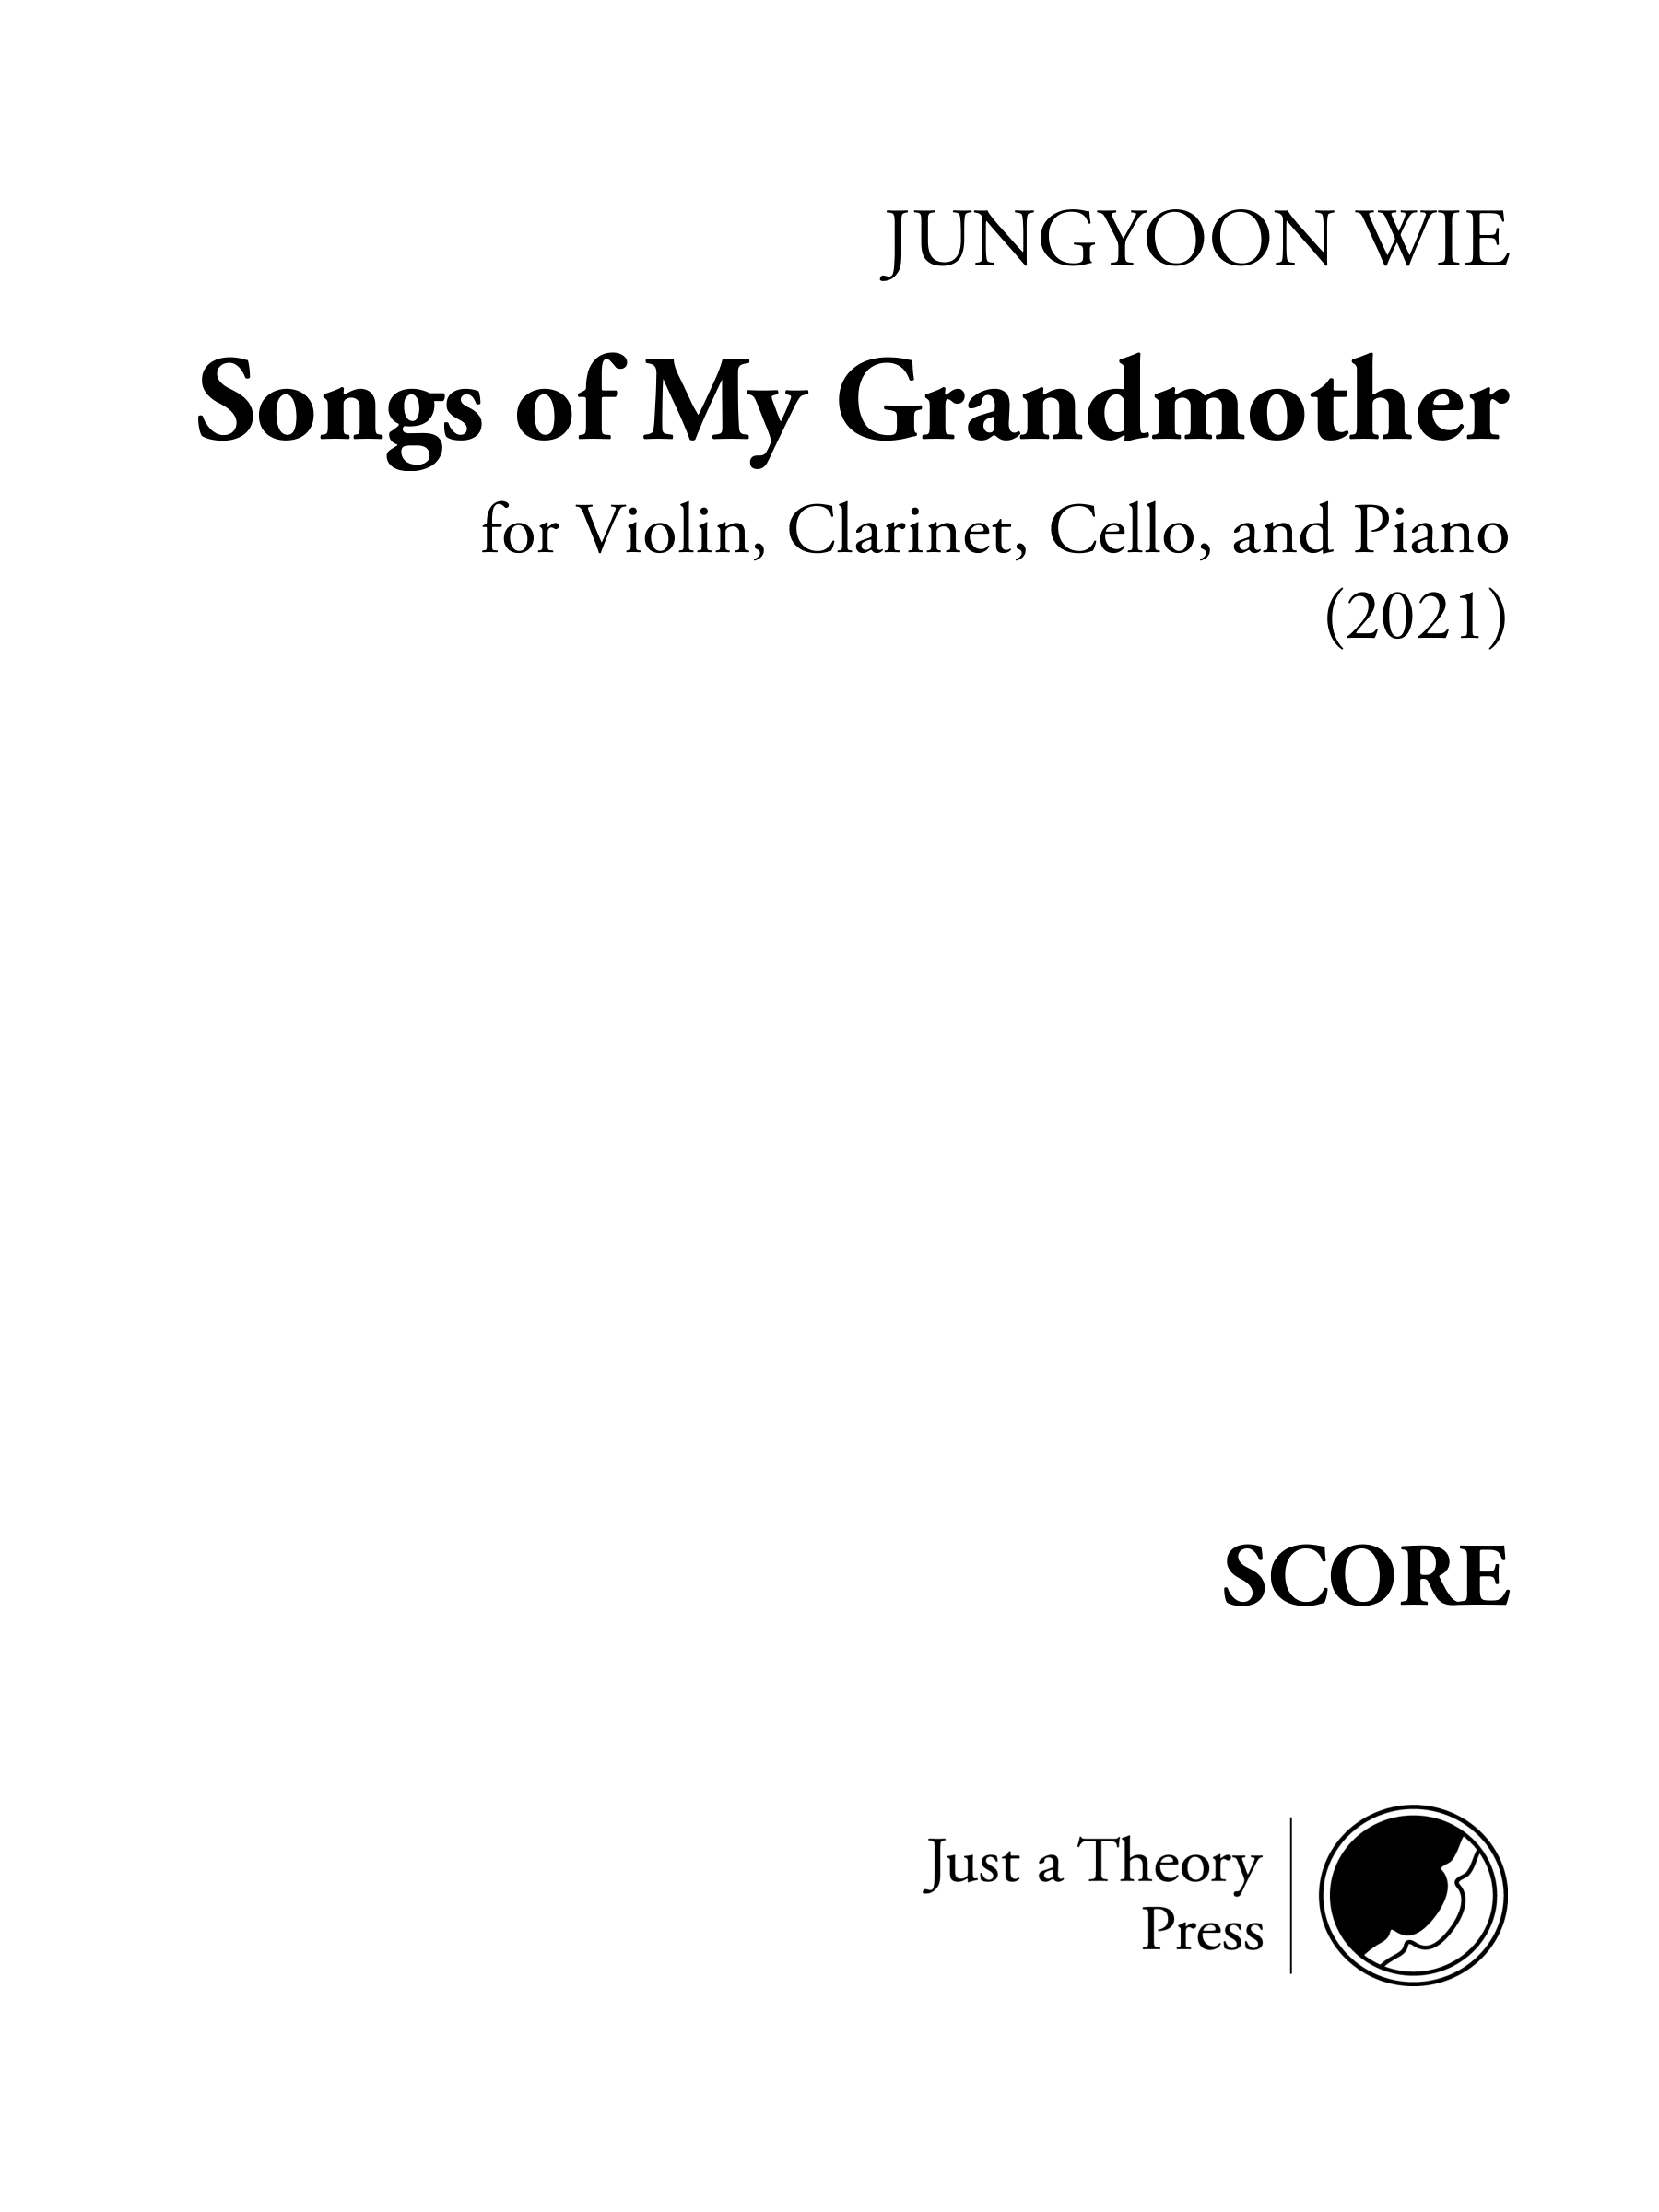 Songs of my Grandmother